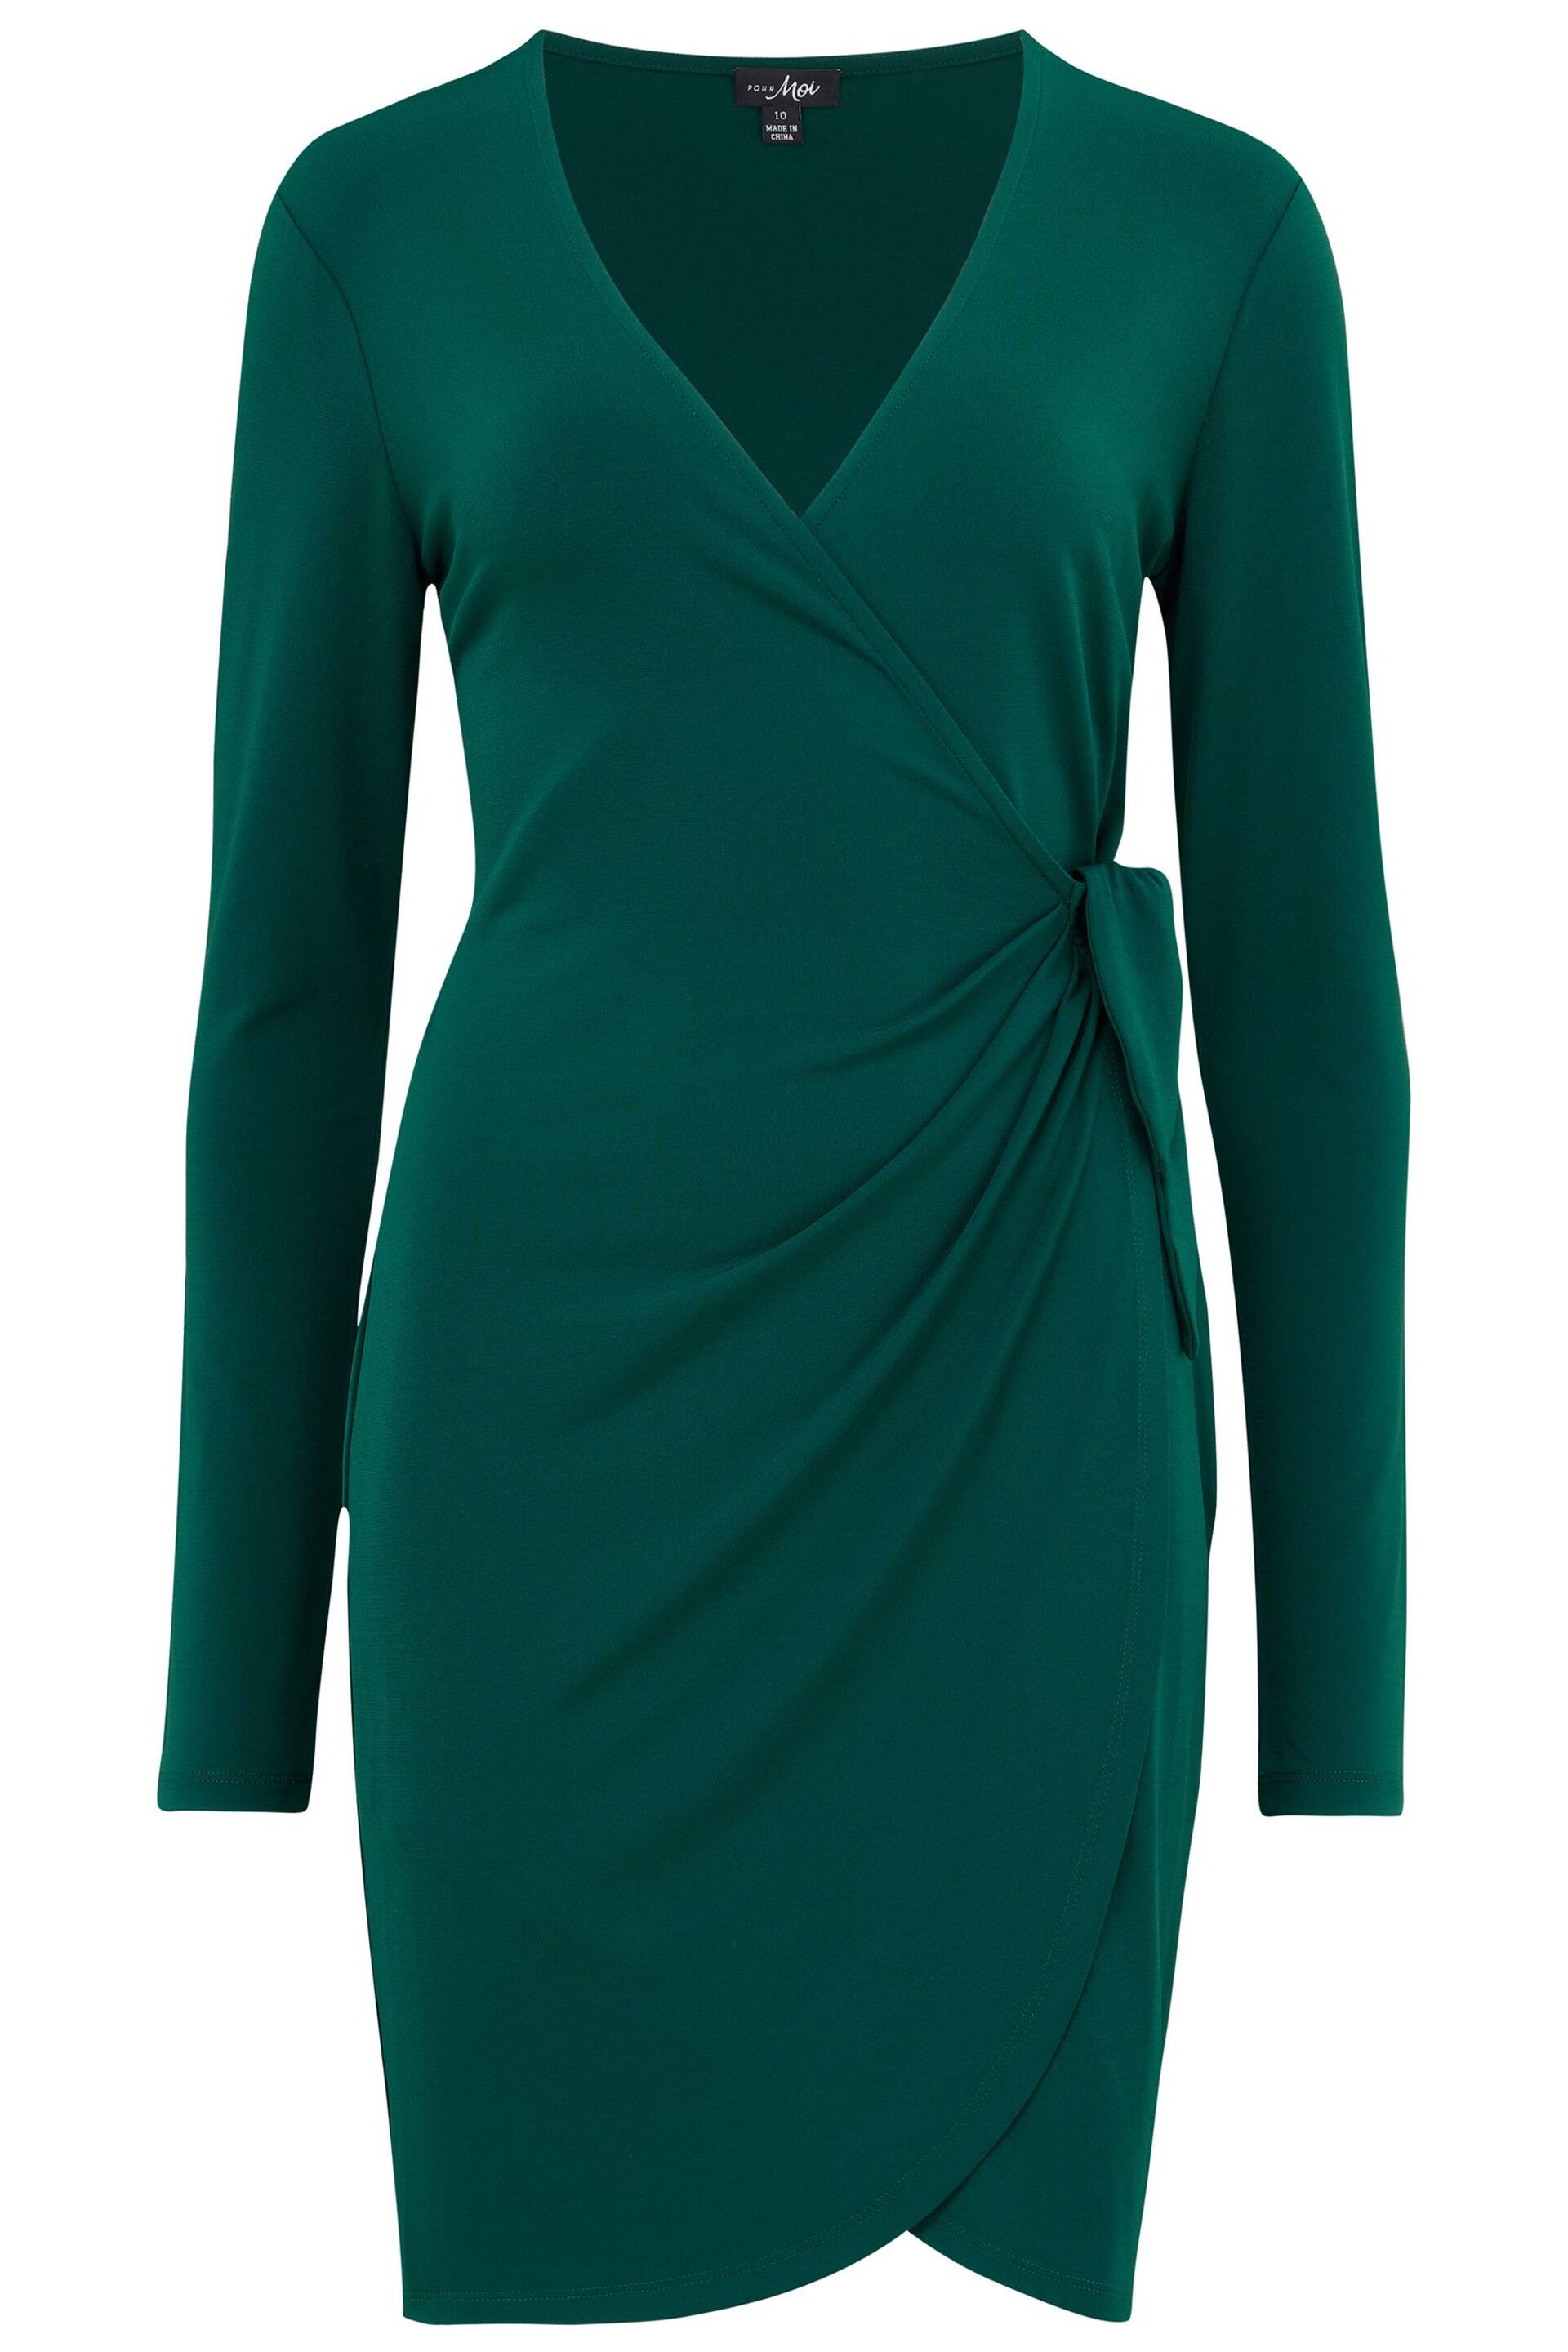 Pour Moi Green Bryony Slinky Dress - Image 4 of 5